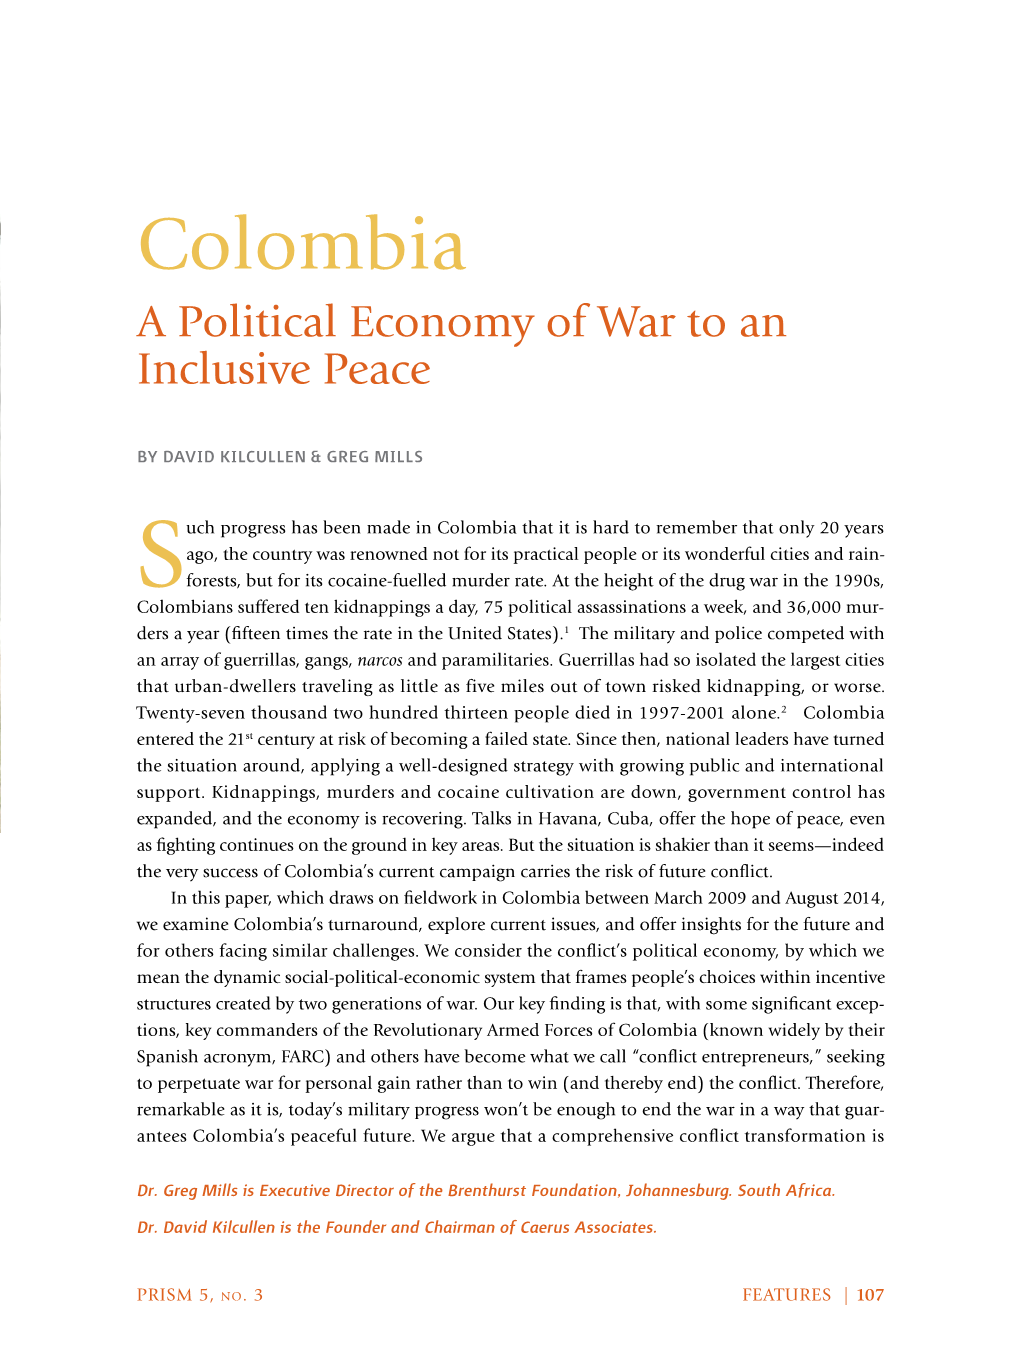 Colombia a Political Economy of War to an Inclusive Peace